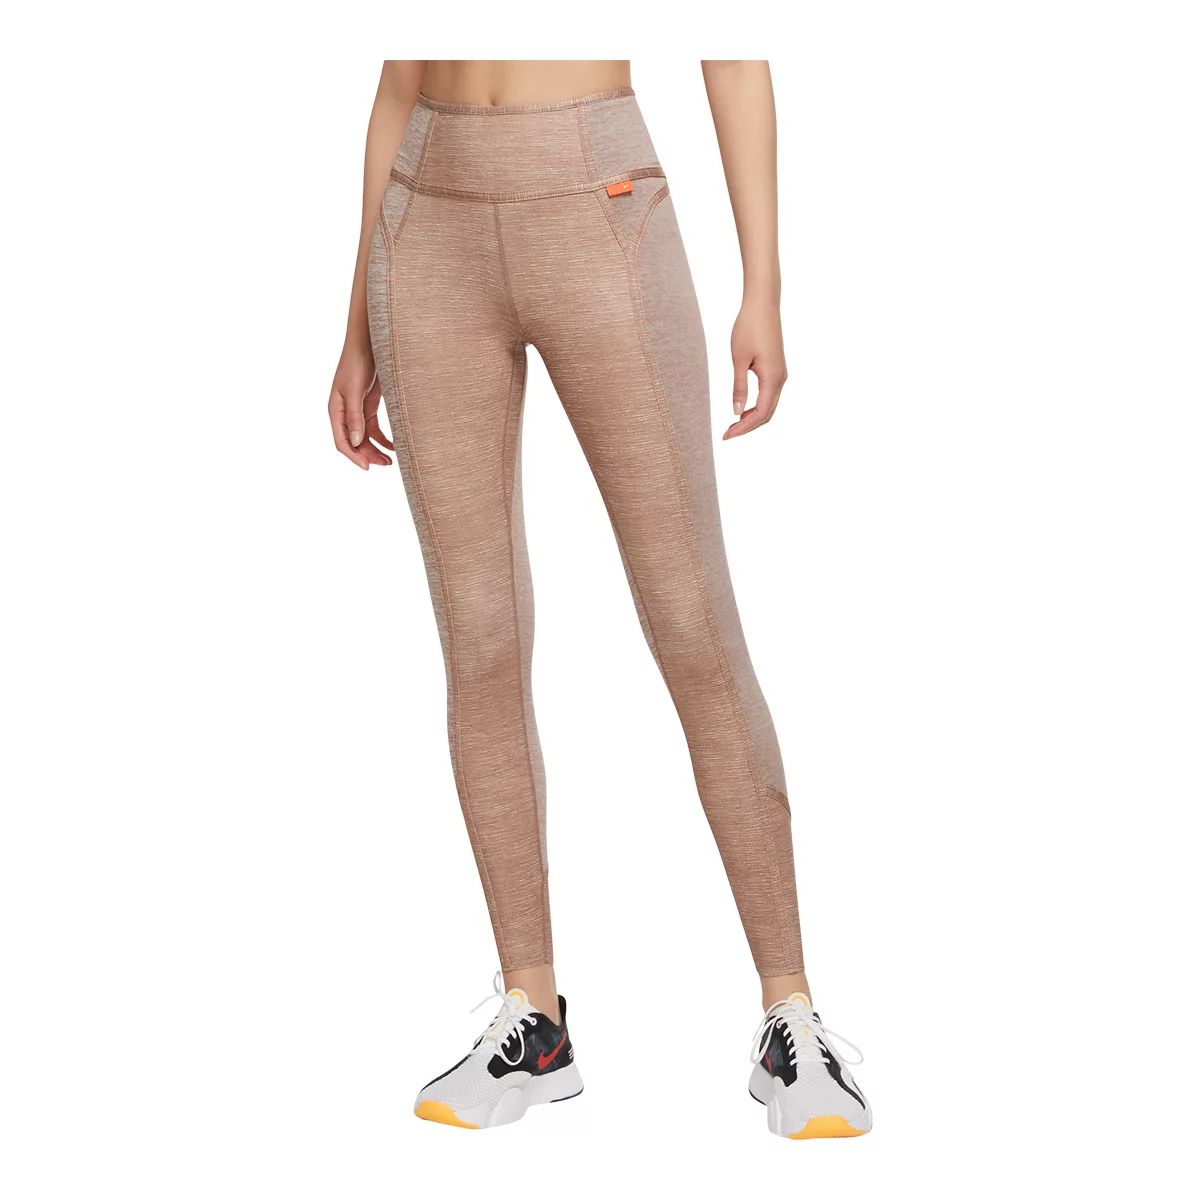 Nike Women's One Luxe Mid-Rise Soft Tights